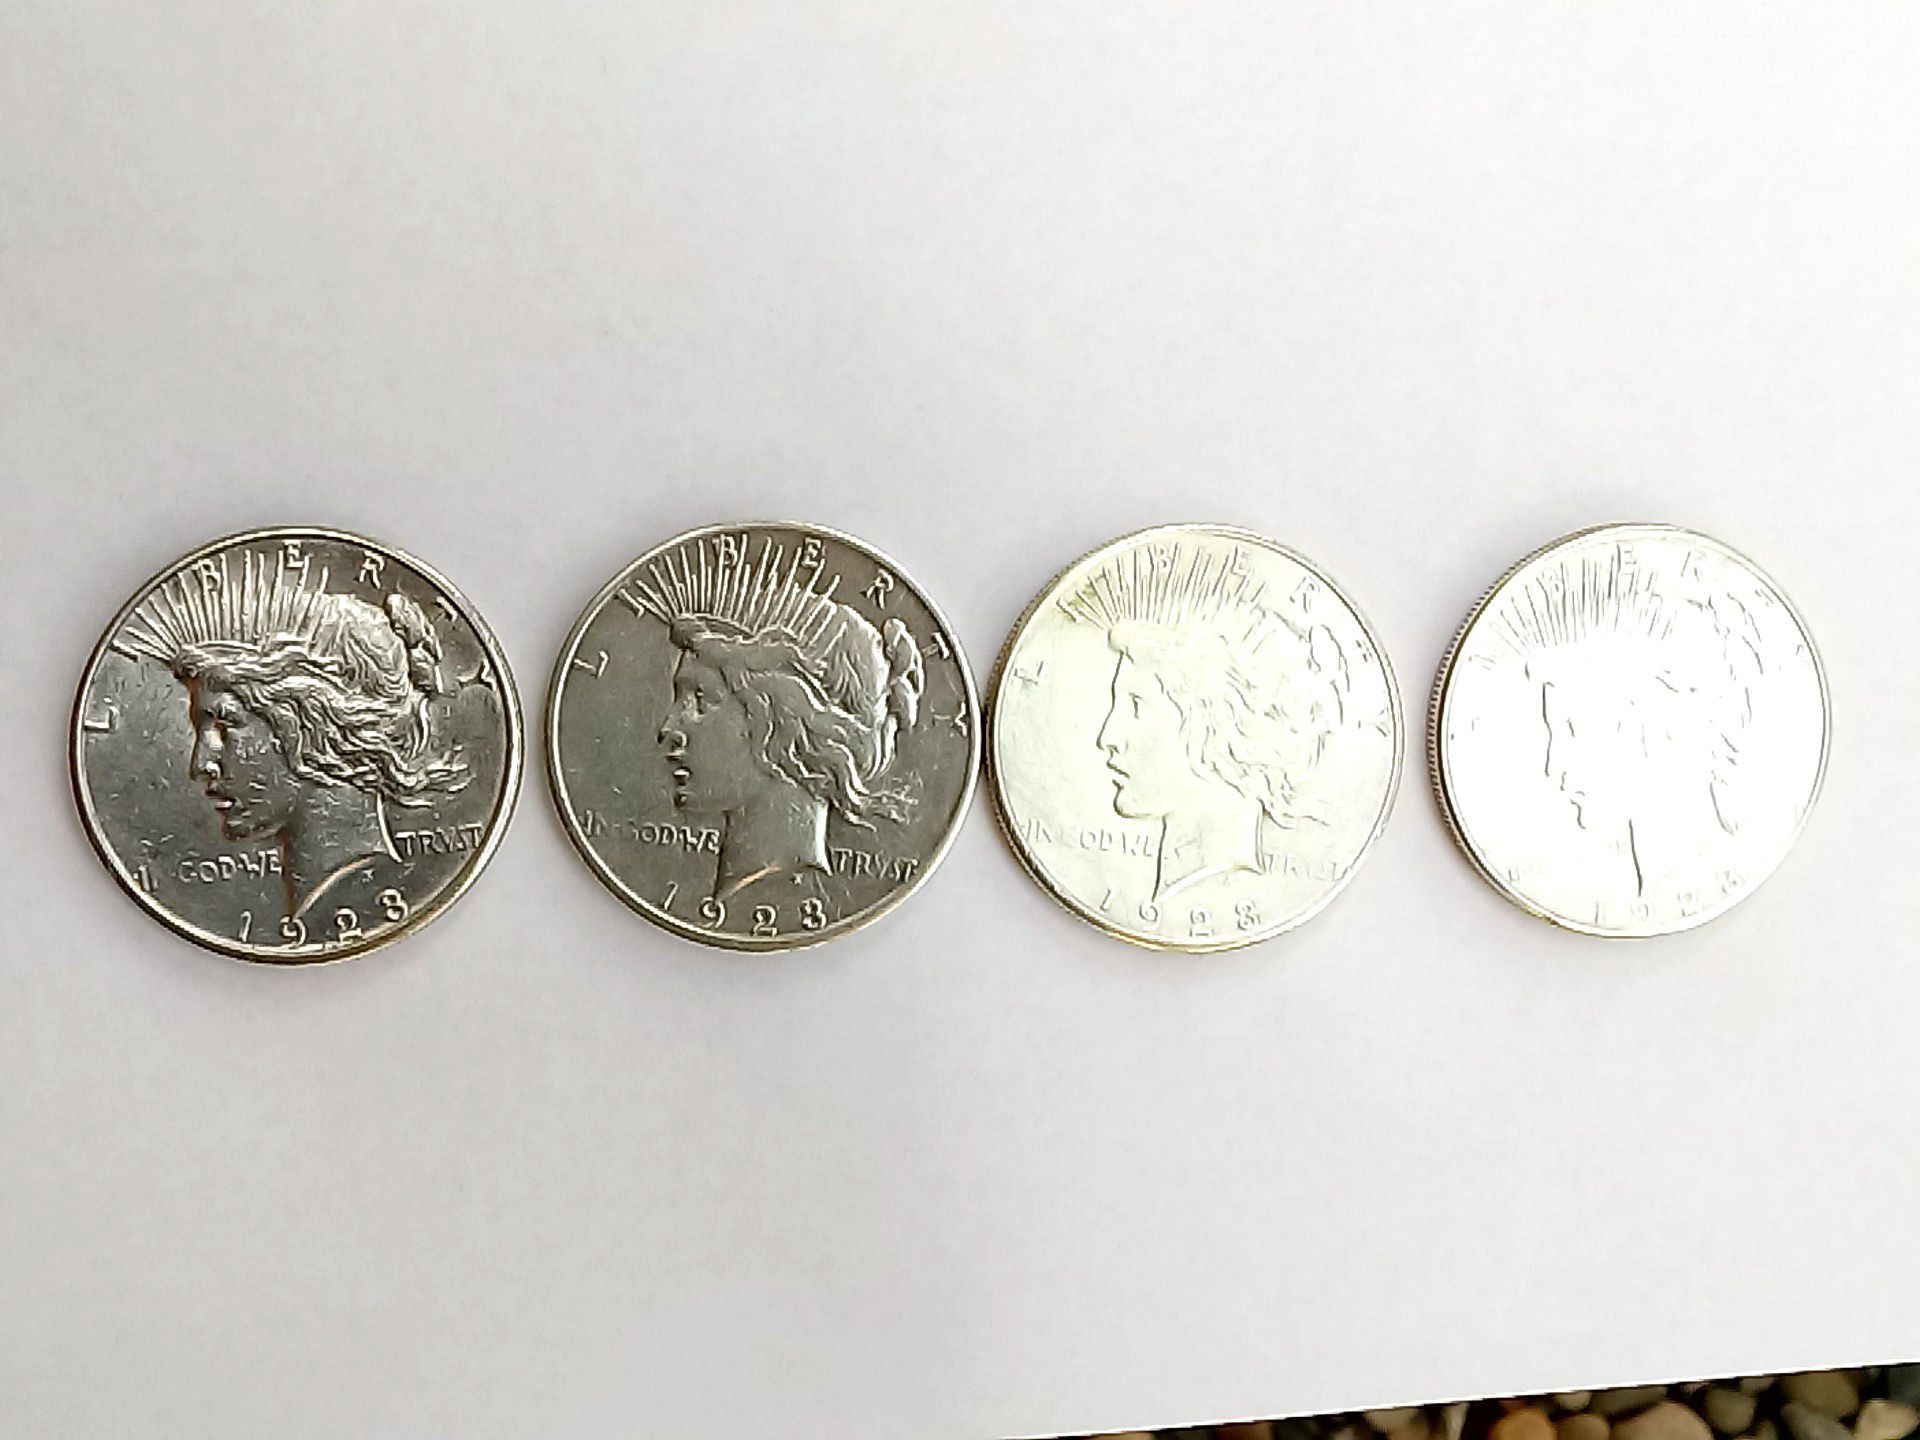 Selling my silver dollar coins for $40 each coin